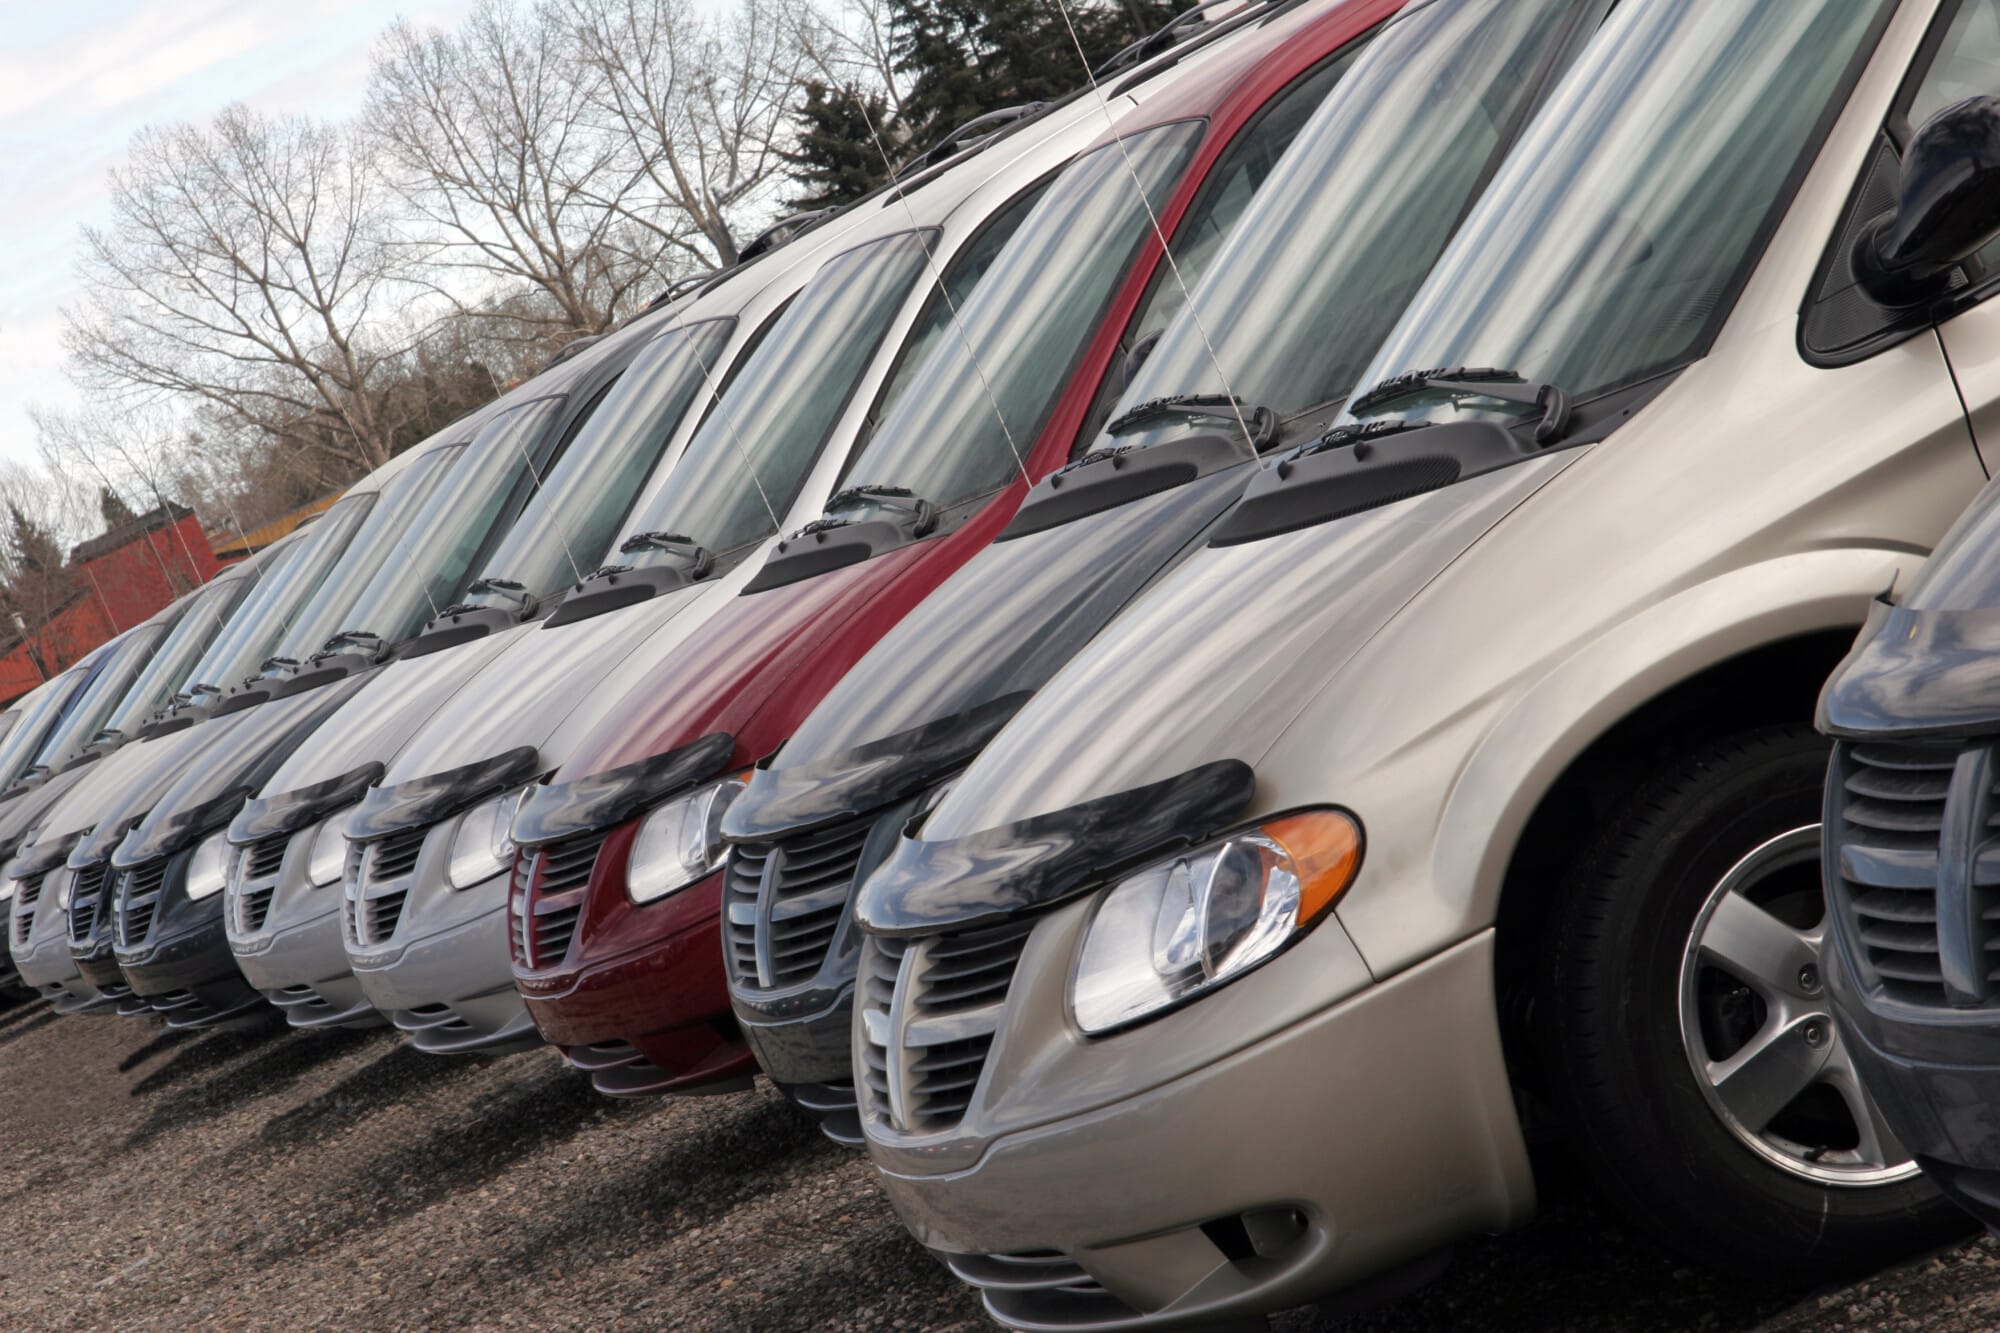 How to Narrow Down the Search When Buying a Used Car